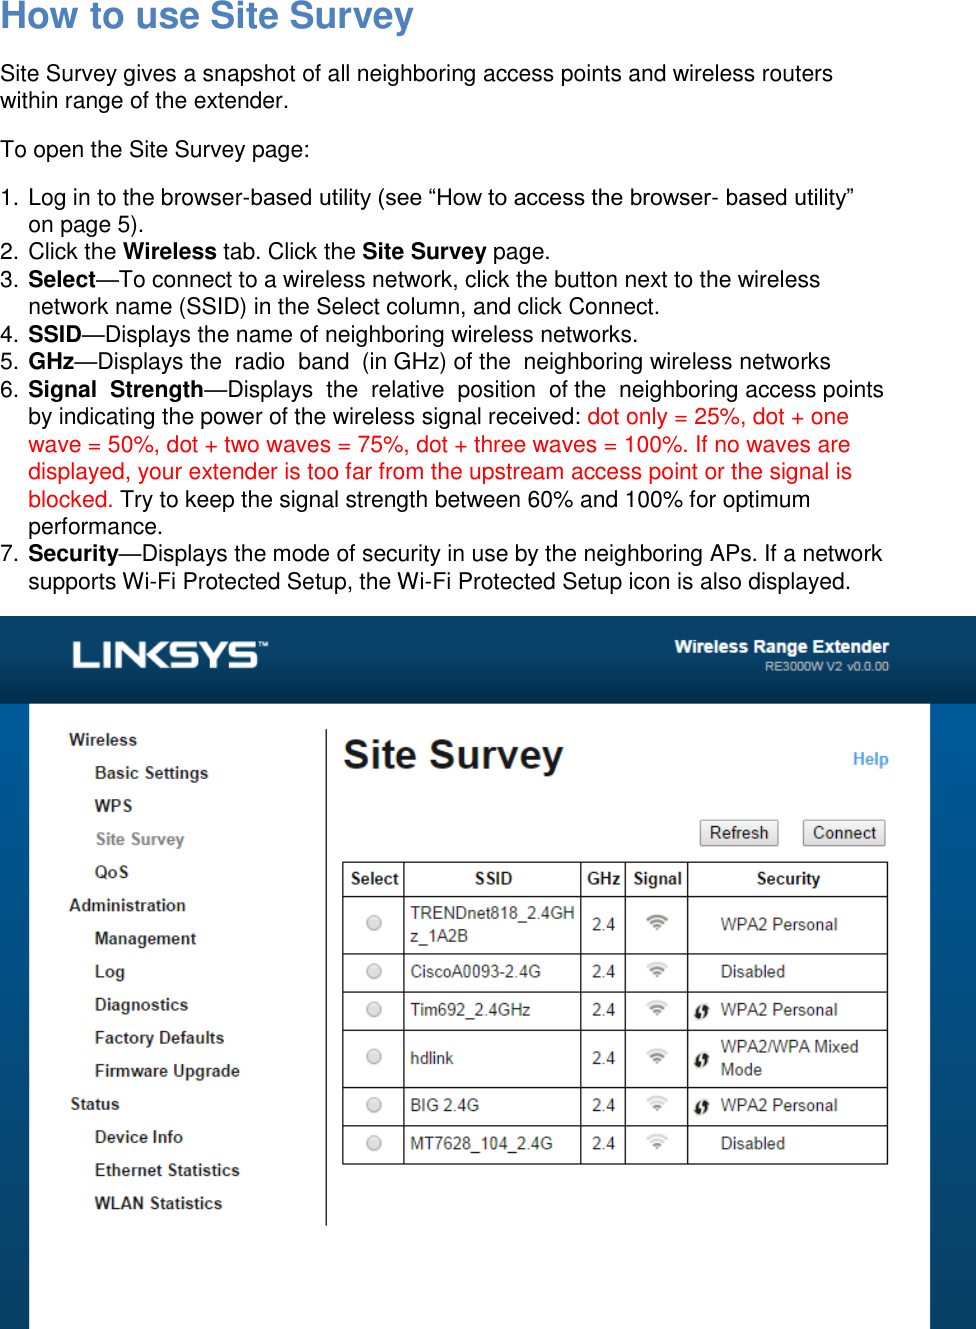 How to use Site Survey Site Survey gives a snapshot of all neighboring access points and wireless routers within range of the extender. To open the Site Survey page: 1. Log in to the browser-based utility (see “How to access the browser- based utility” on page 5). 2. Click the Wireless tab. Click the Site Survey page. 3. Select—To connect to a wireless network, click the button next to the wireless network name (SSID) in the Select column, and click Connect. 4. SSID—Displays the name of neighboring wireless networks. 5. GHz—Displays the  radio  band  (in GHz) of the  neighboring wireless networks 6. Signal  Strength—Displays  the  relative  position  of the  neighboring access points  by indicating the power of the wireless signal received: dot only = 25%, dot + one wave = 50%, dot + two waves = 75%, dot + three waves = 100%. If no waves are displayed, your extender is too far from the upstream access point or the signal is blocked. Try to keep the signal strength between 60% and 100% for optimum performance. 7. Security—Displays the mode of security in use by the neighboring APs. If a network supports Wi-Fi Protected Setup, the Wi-Fi Protected Setup icon is also displayed.  